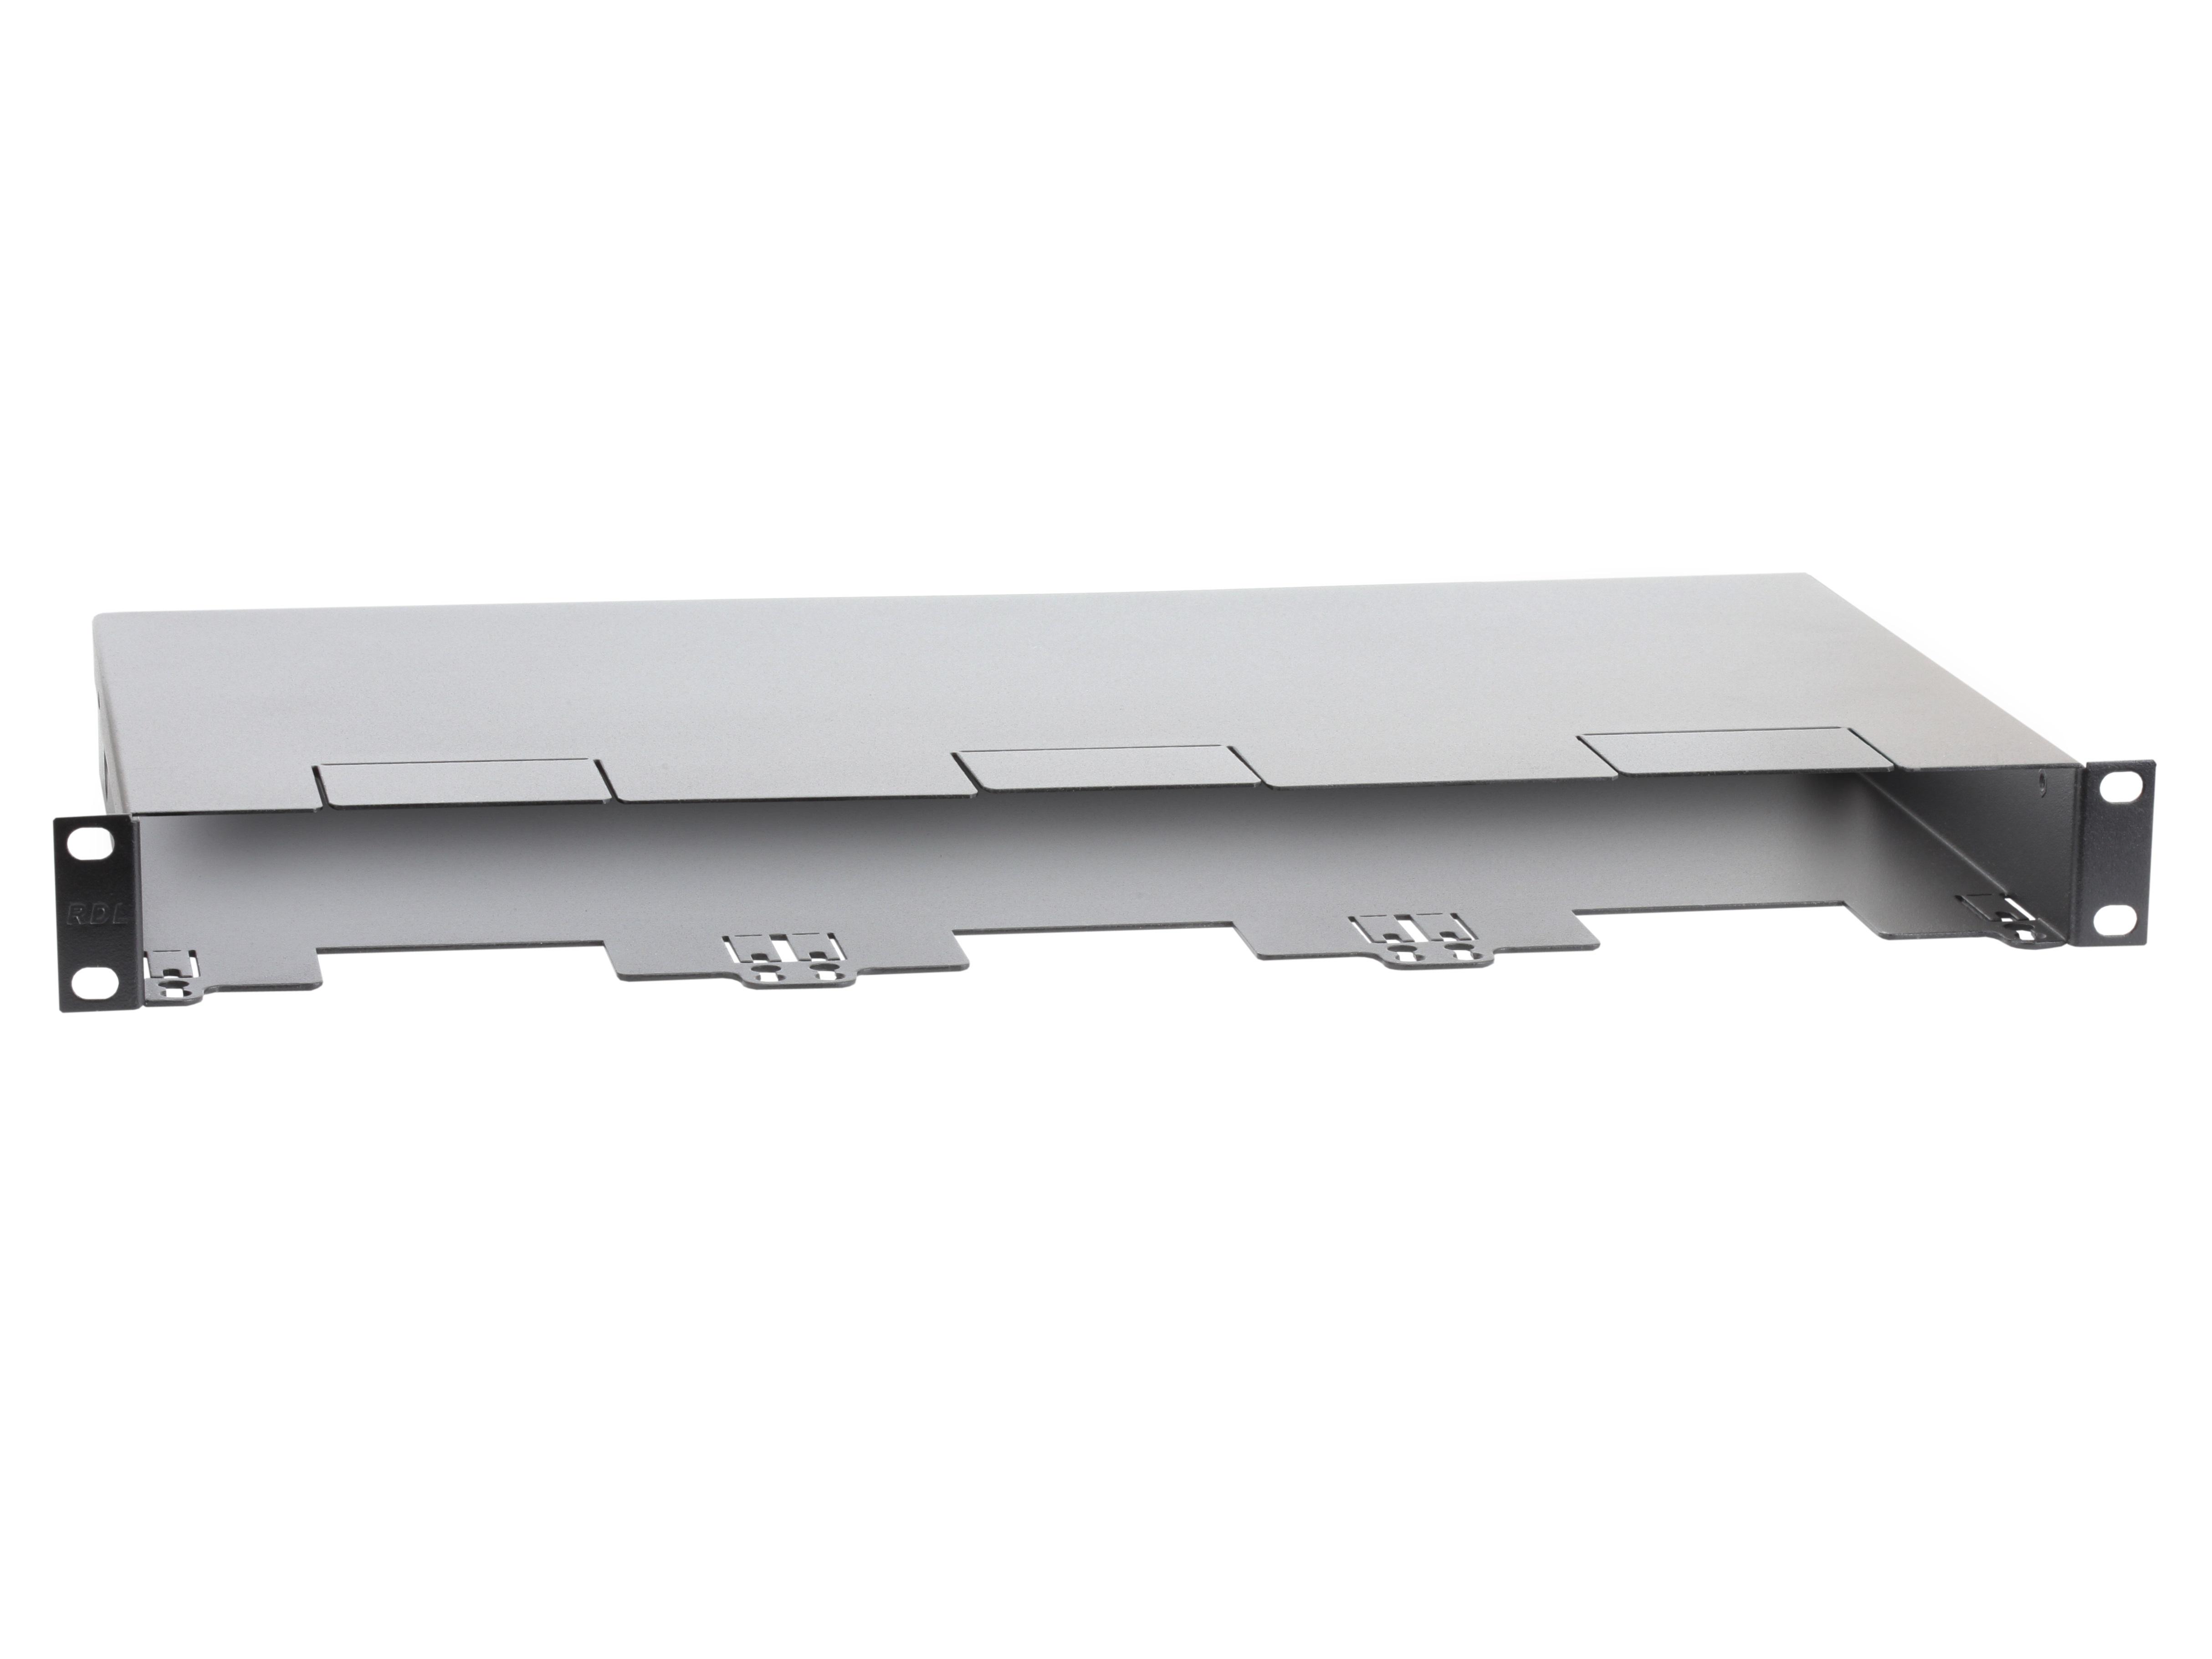 RC-1UR 19 inch Universal Rack Chassis by RDL